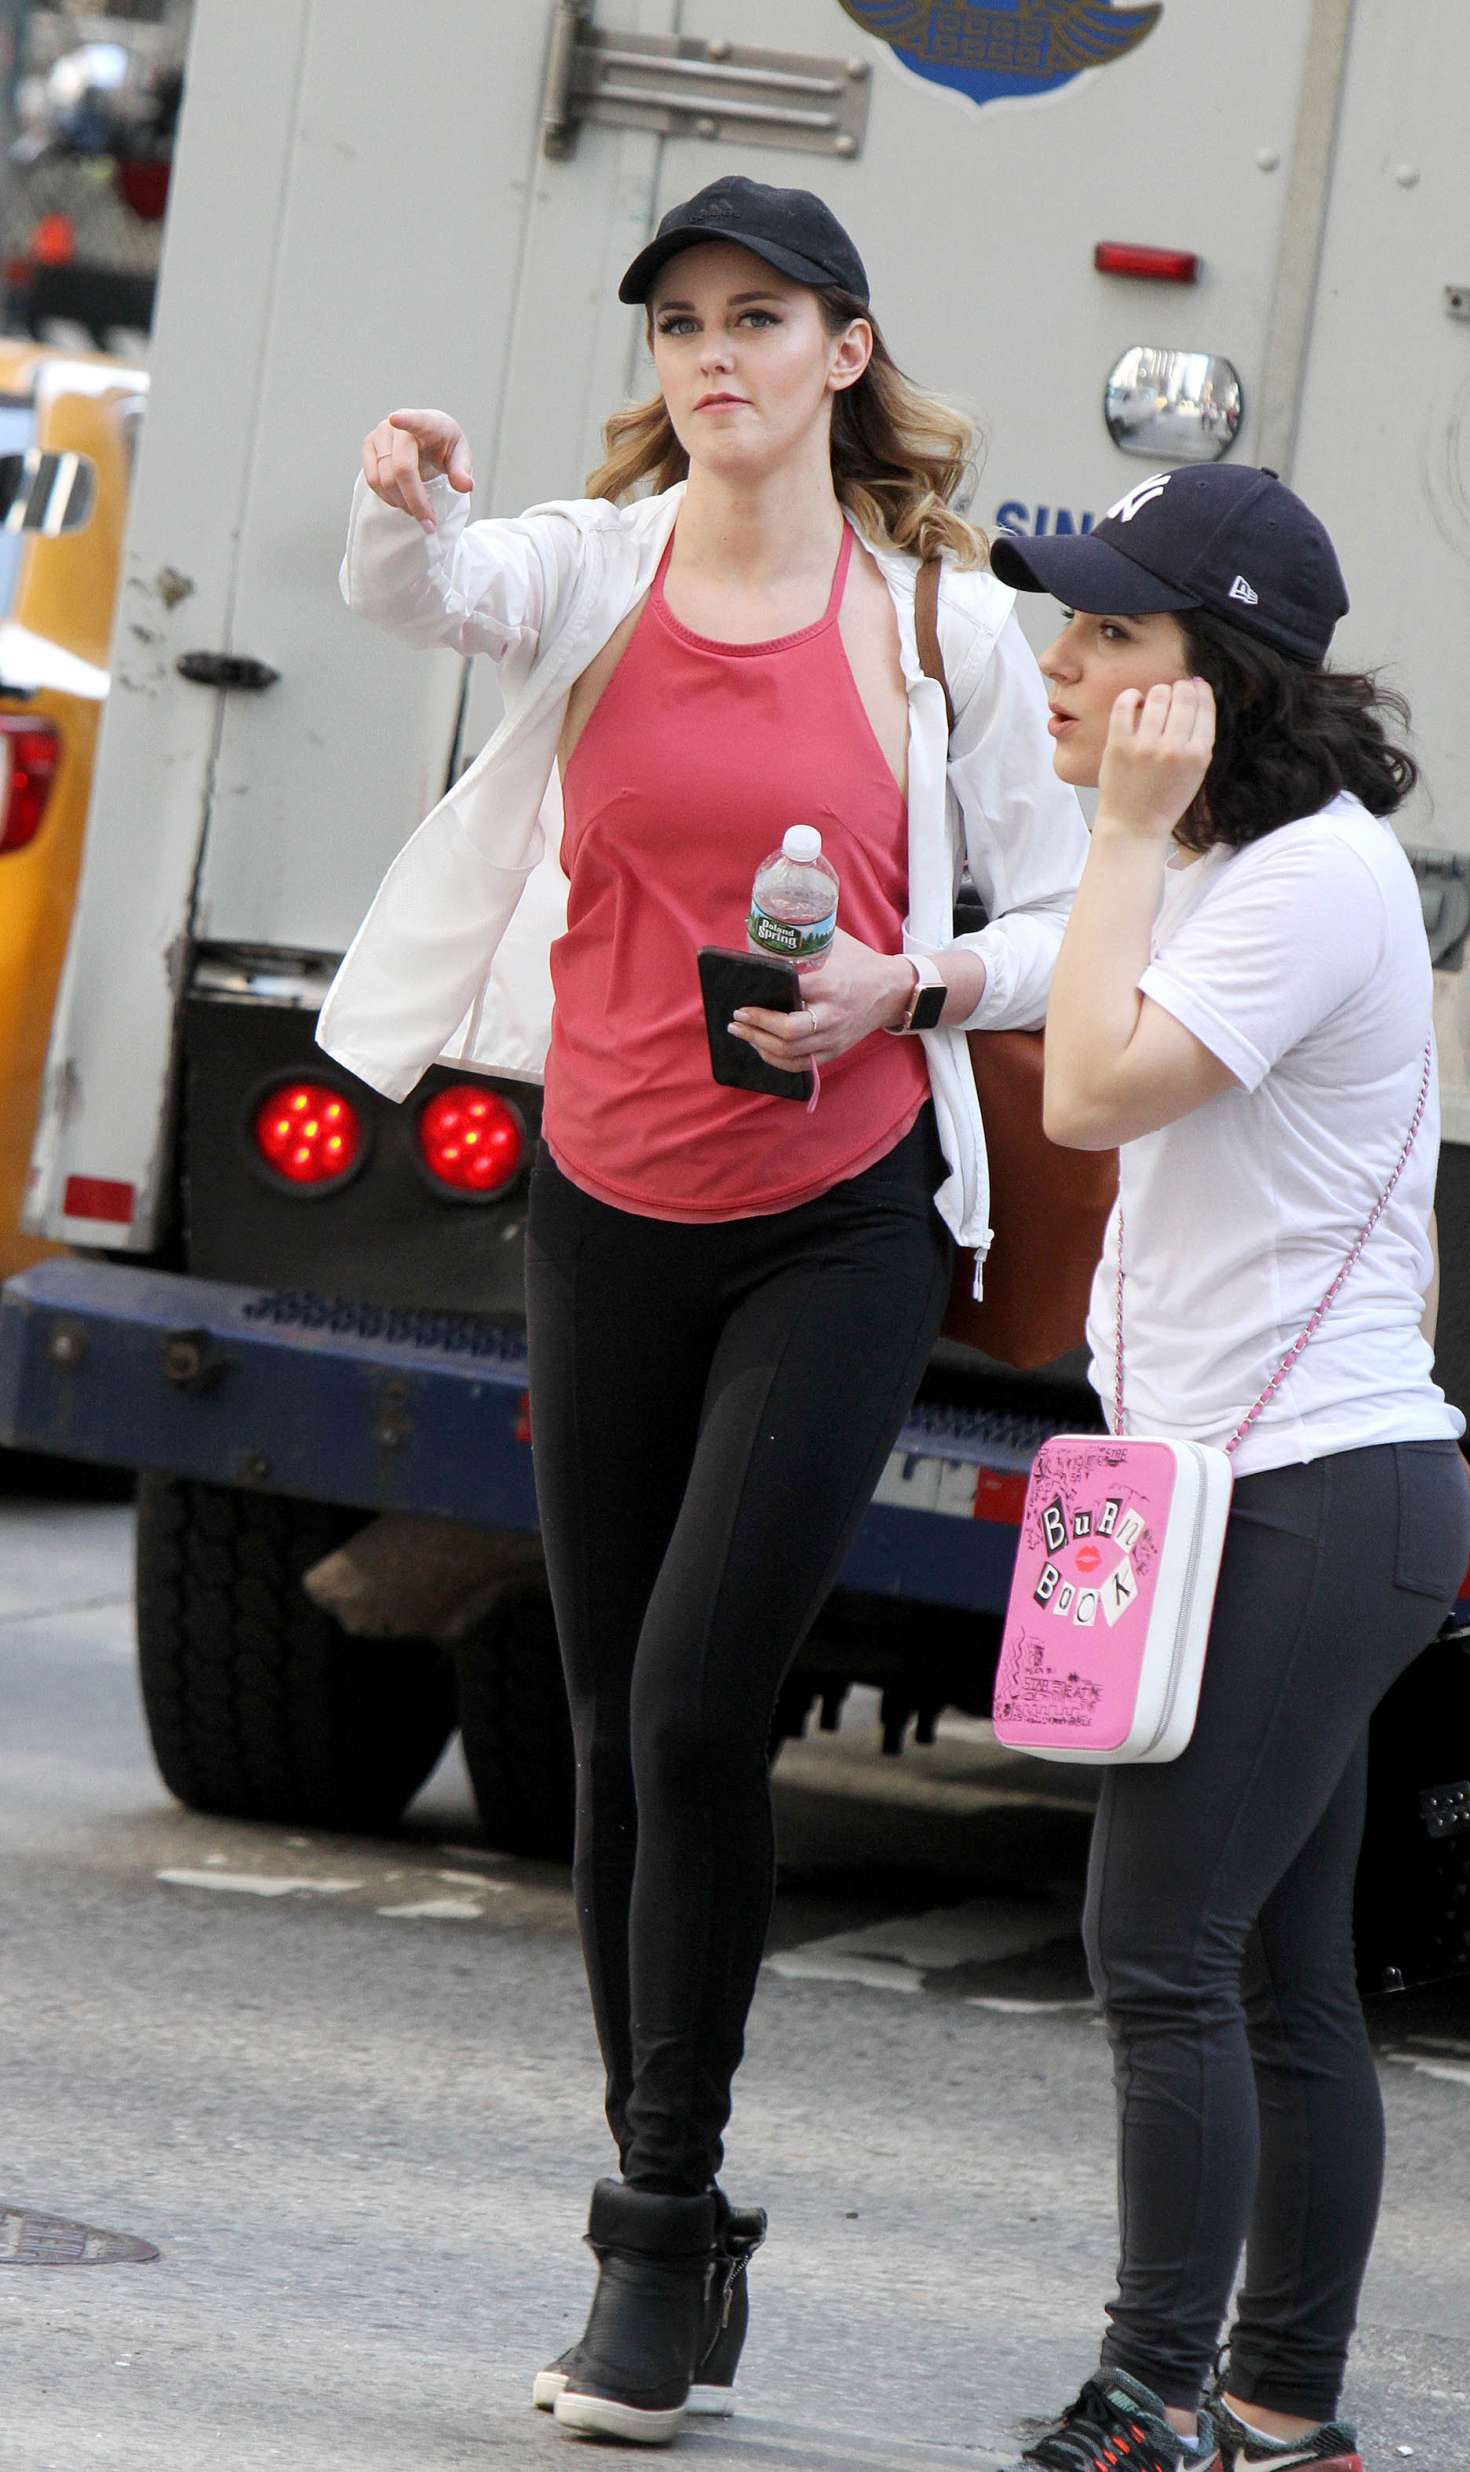 Taylor Louderman â€“ Hailing a taxi cab in NYC